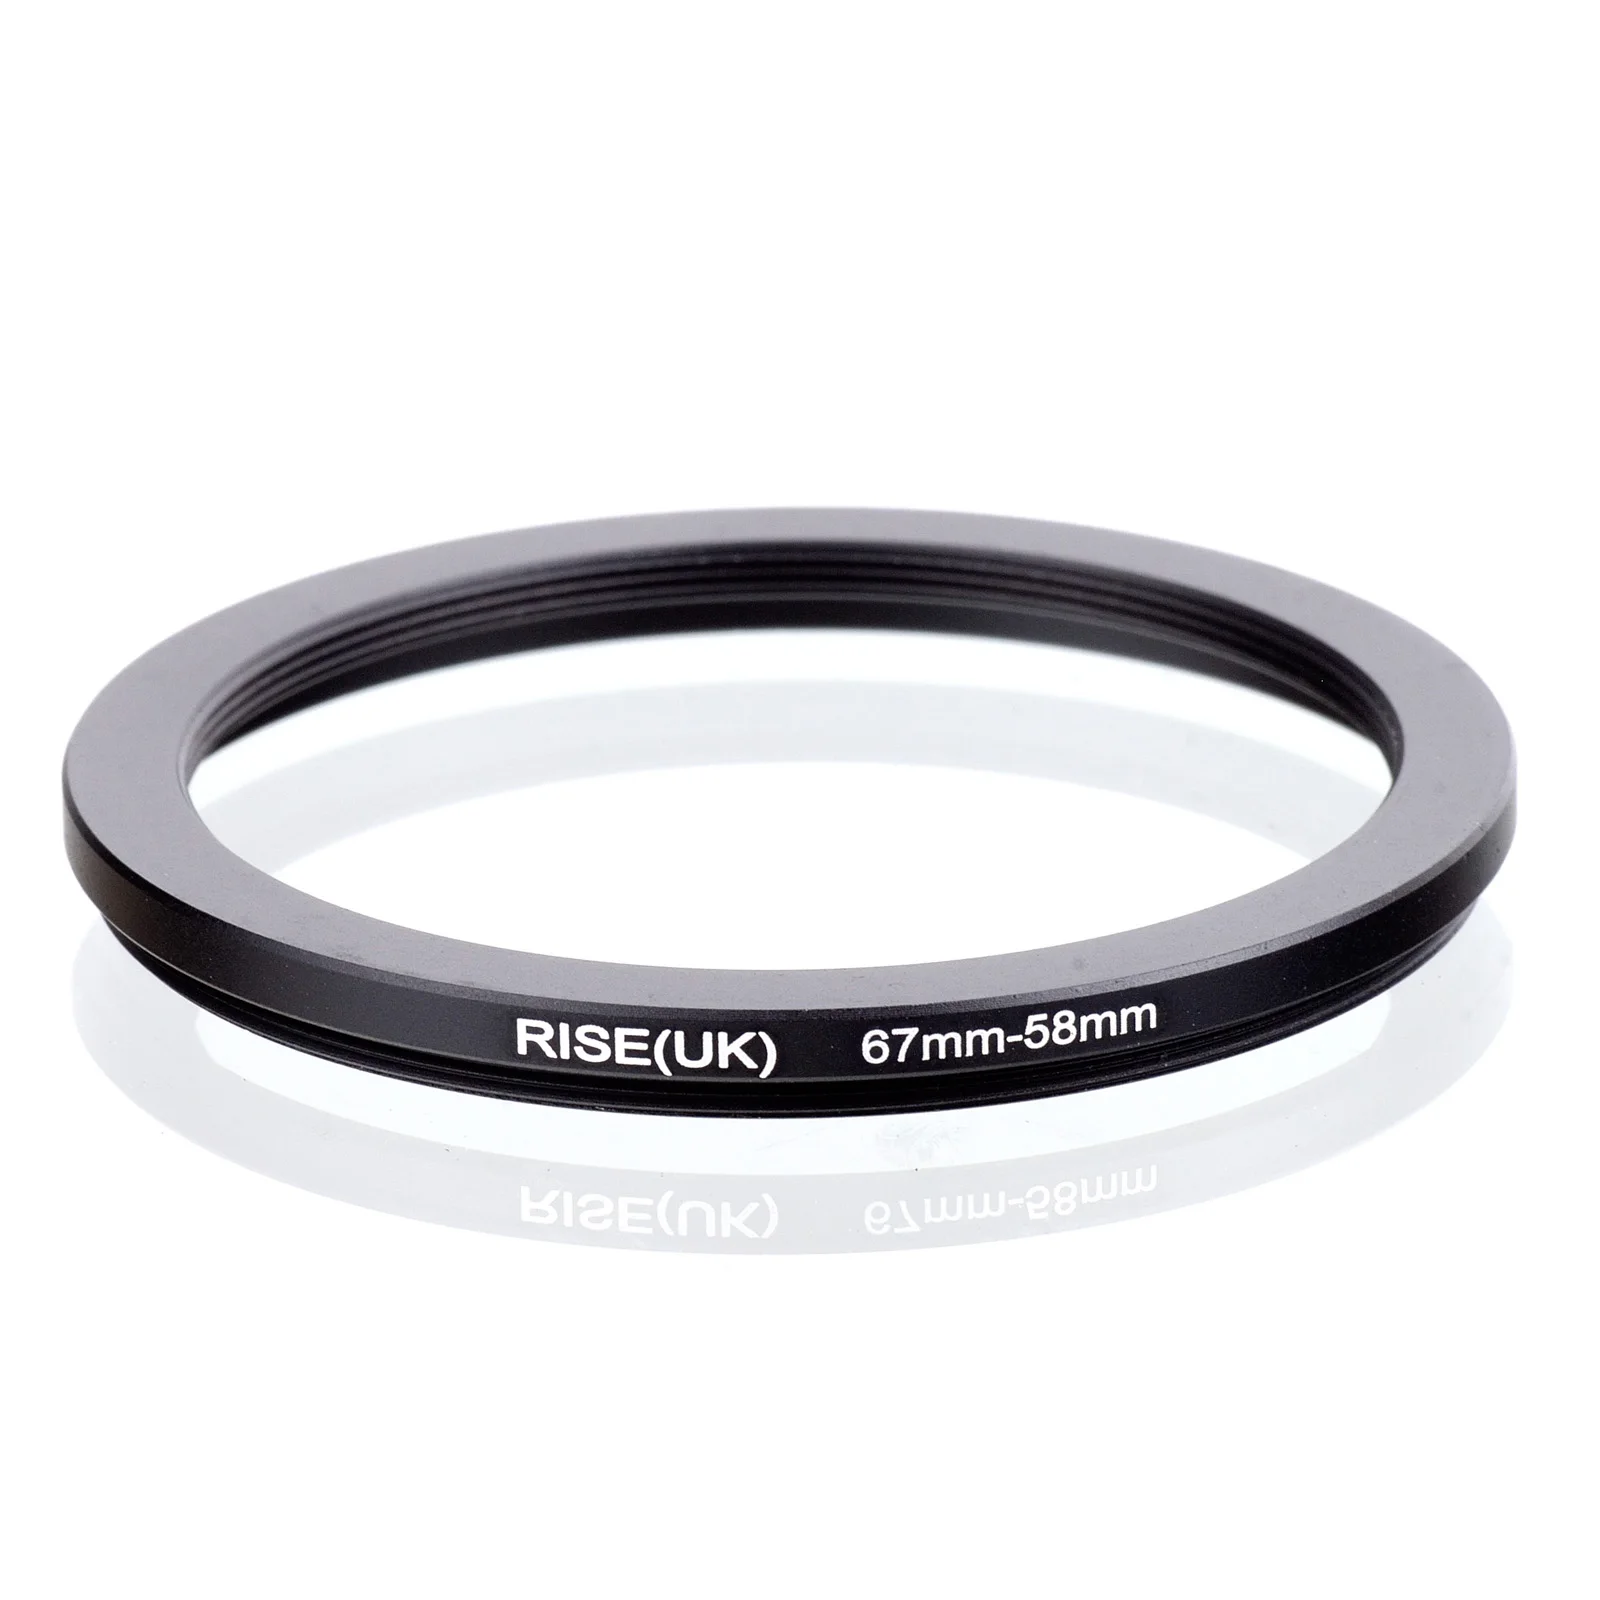 

RISE(UK) Metal 67mm-58mm 67-58 mm 67 to 58 Step down Filter Ring Adapter Black